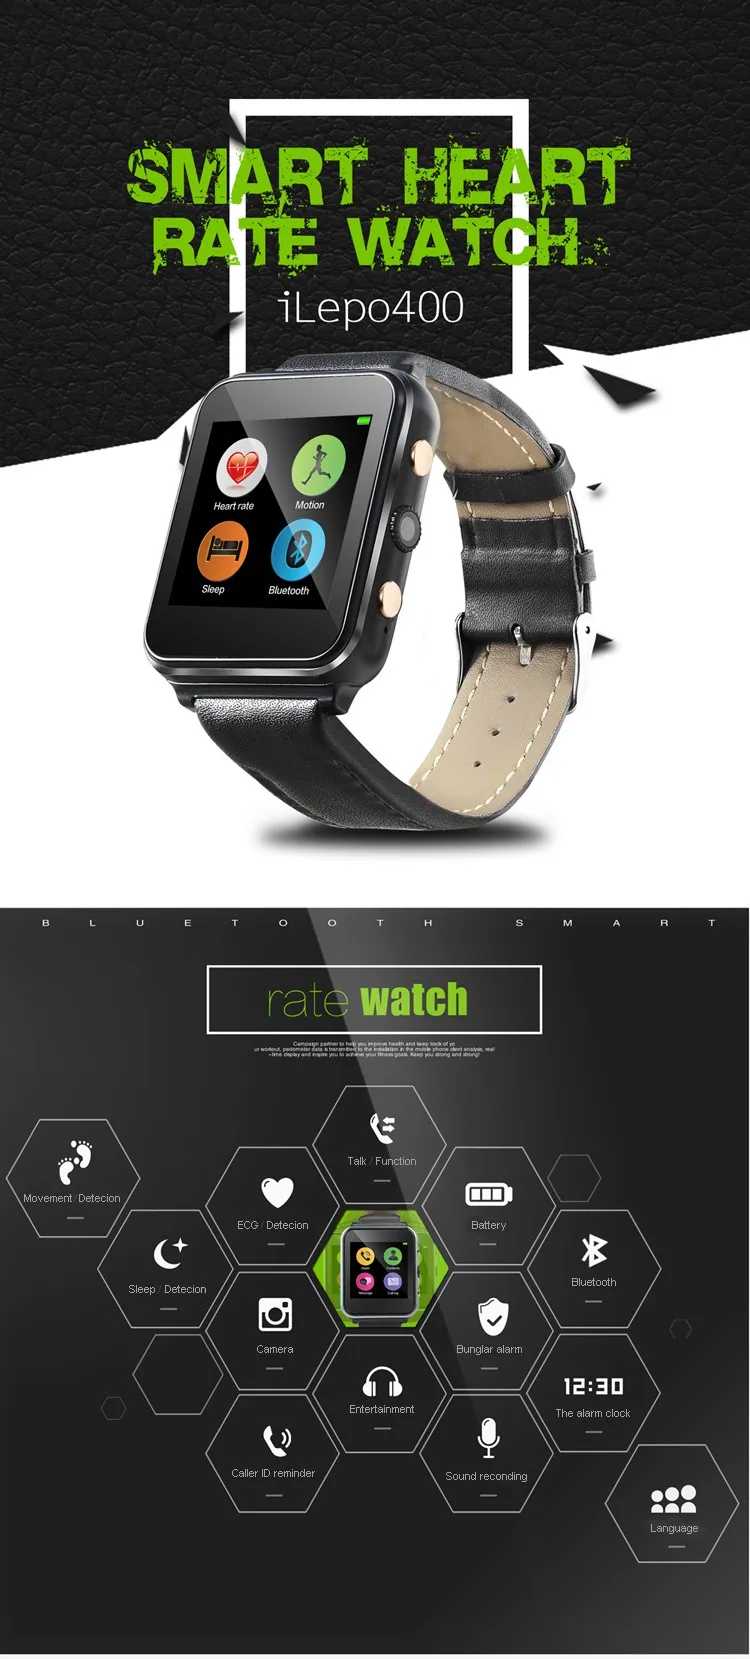 RAXKO smartwatch android Bluetooth smart watch phone with